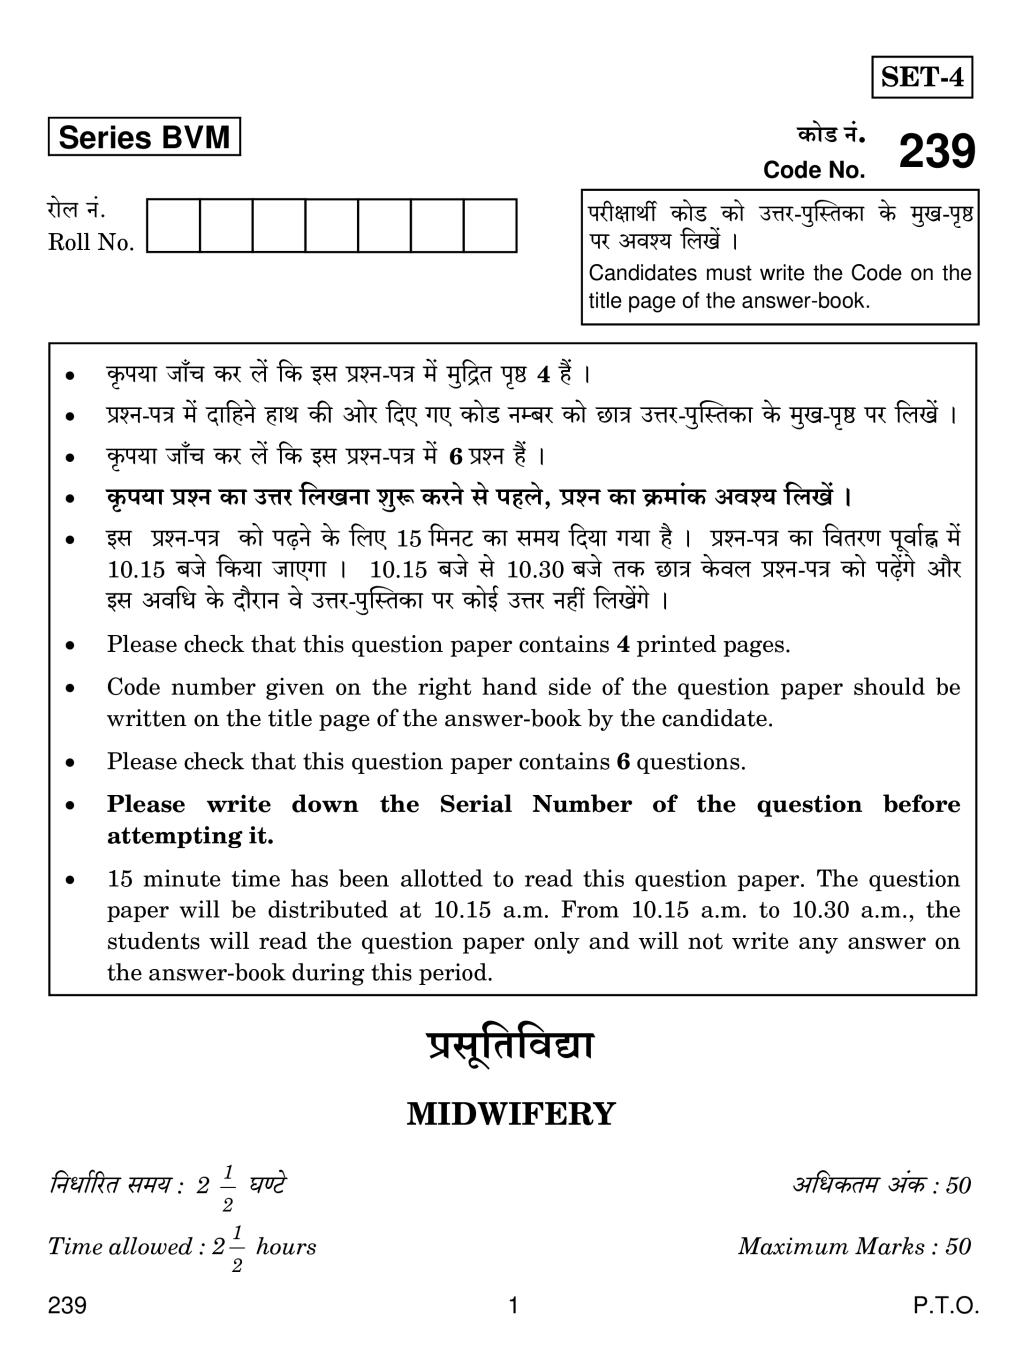 CBSE Class 12 Midwifery Question Paper 2019 - Page 1